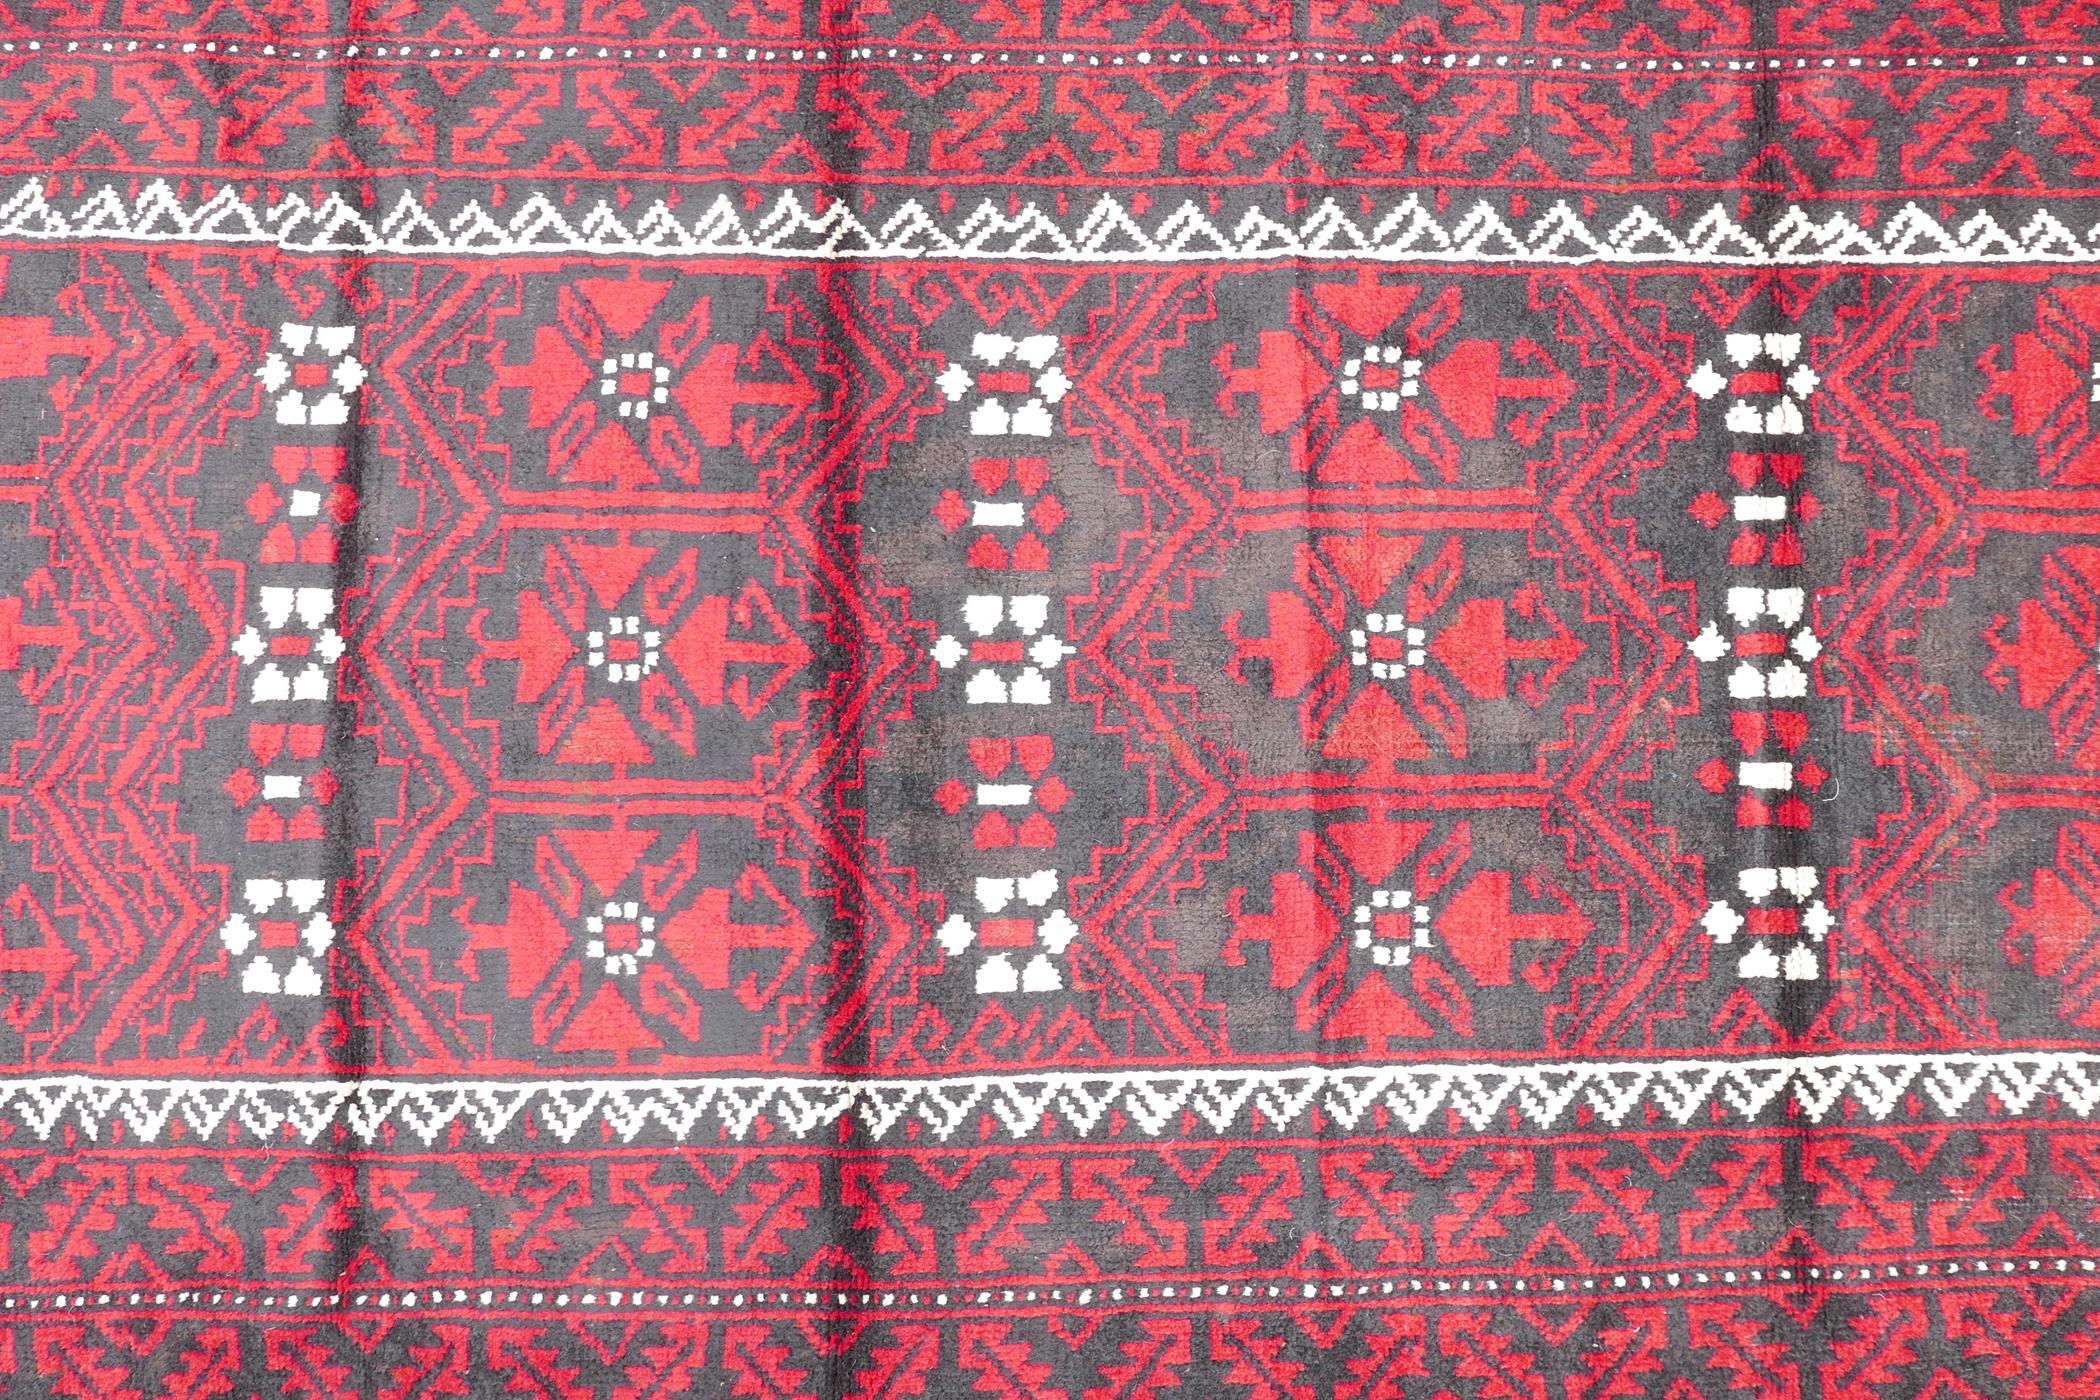 Hand woven full pile red and black ground Iranian Belouch rug, 50½" x 110"